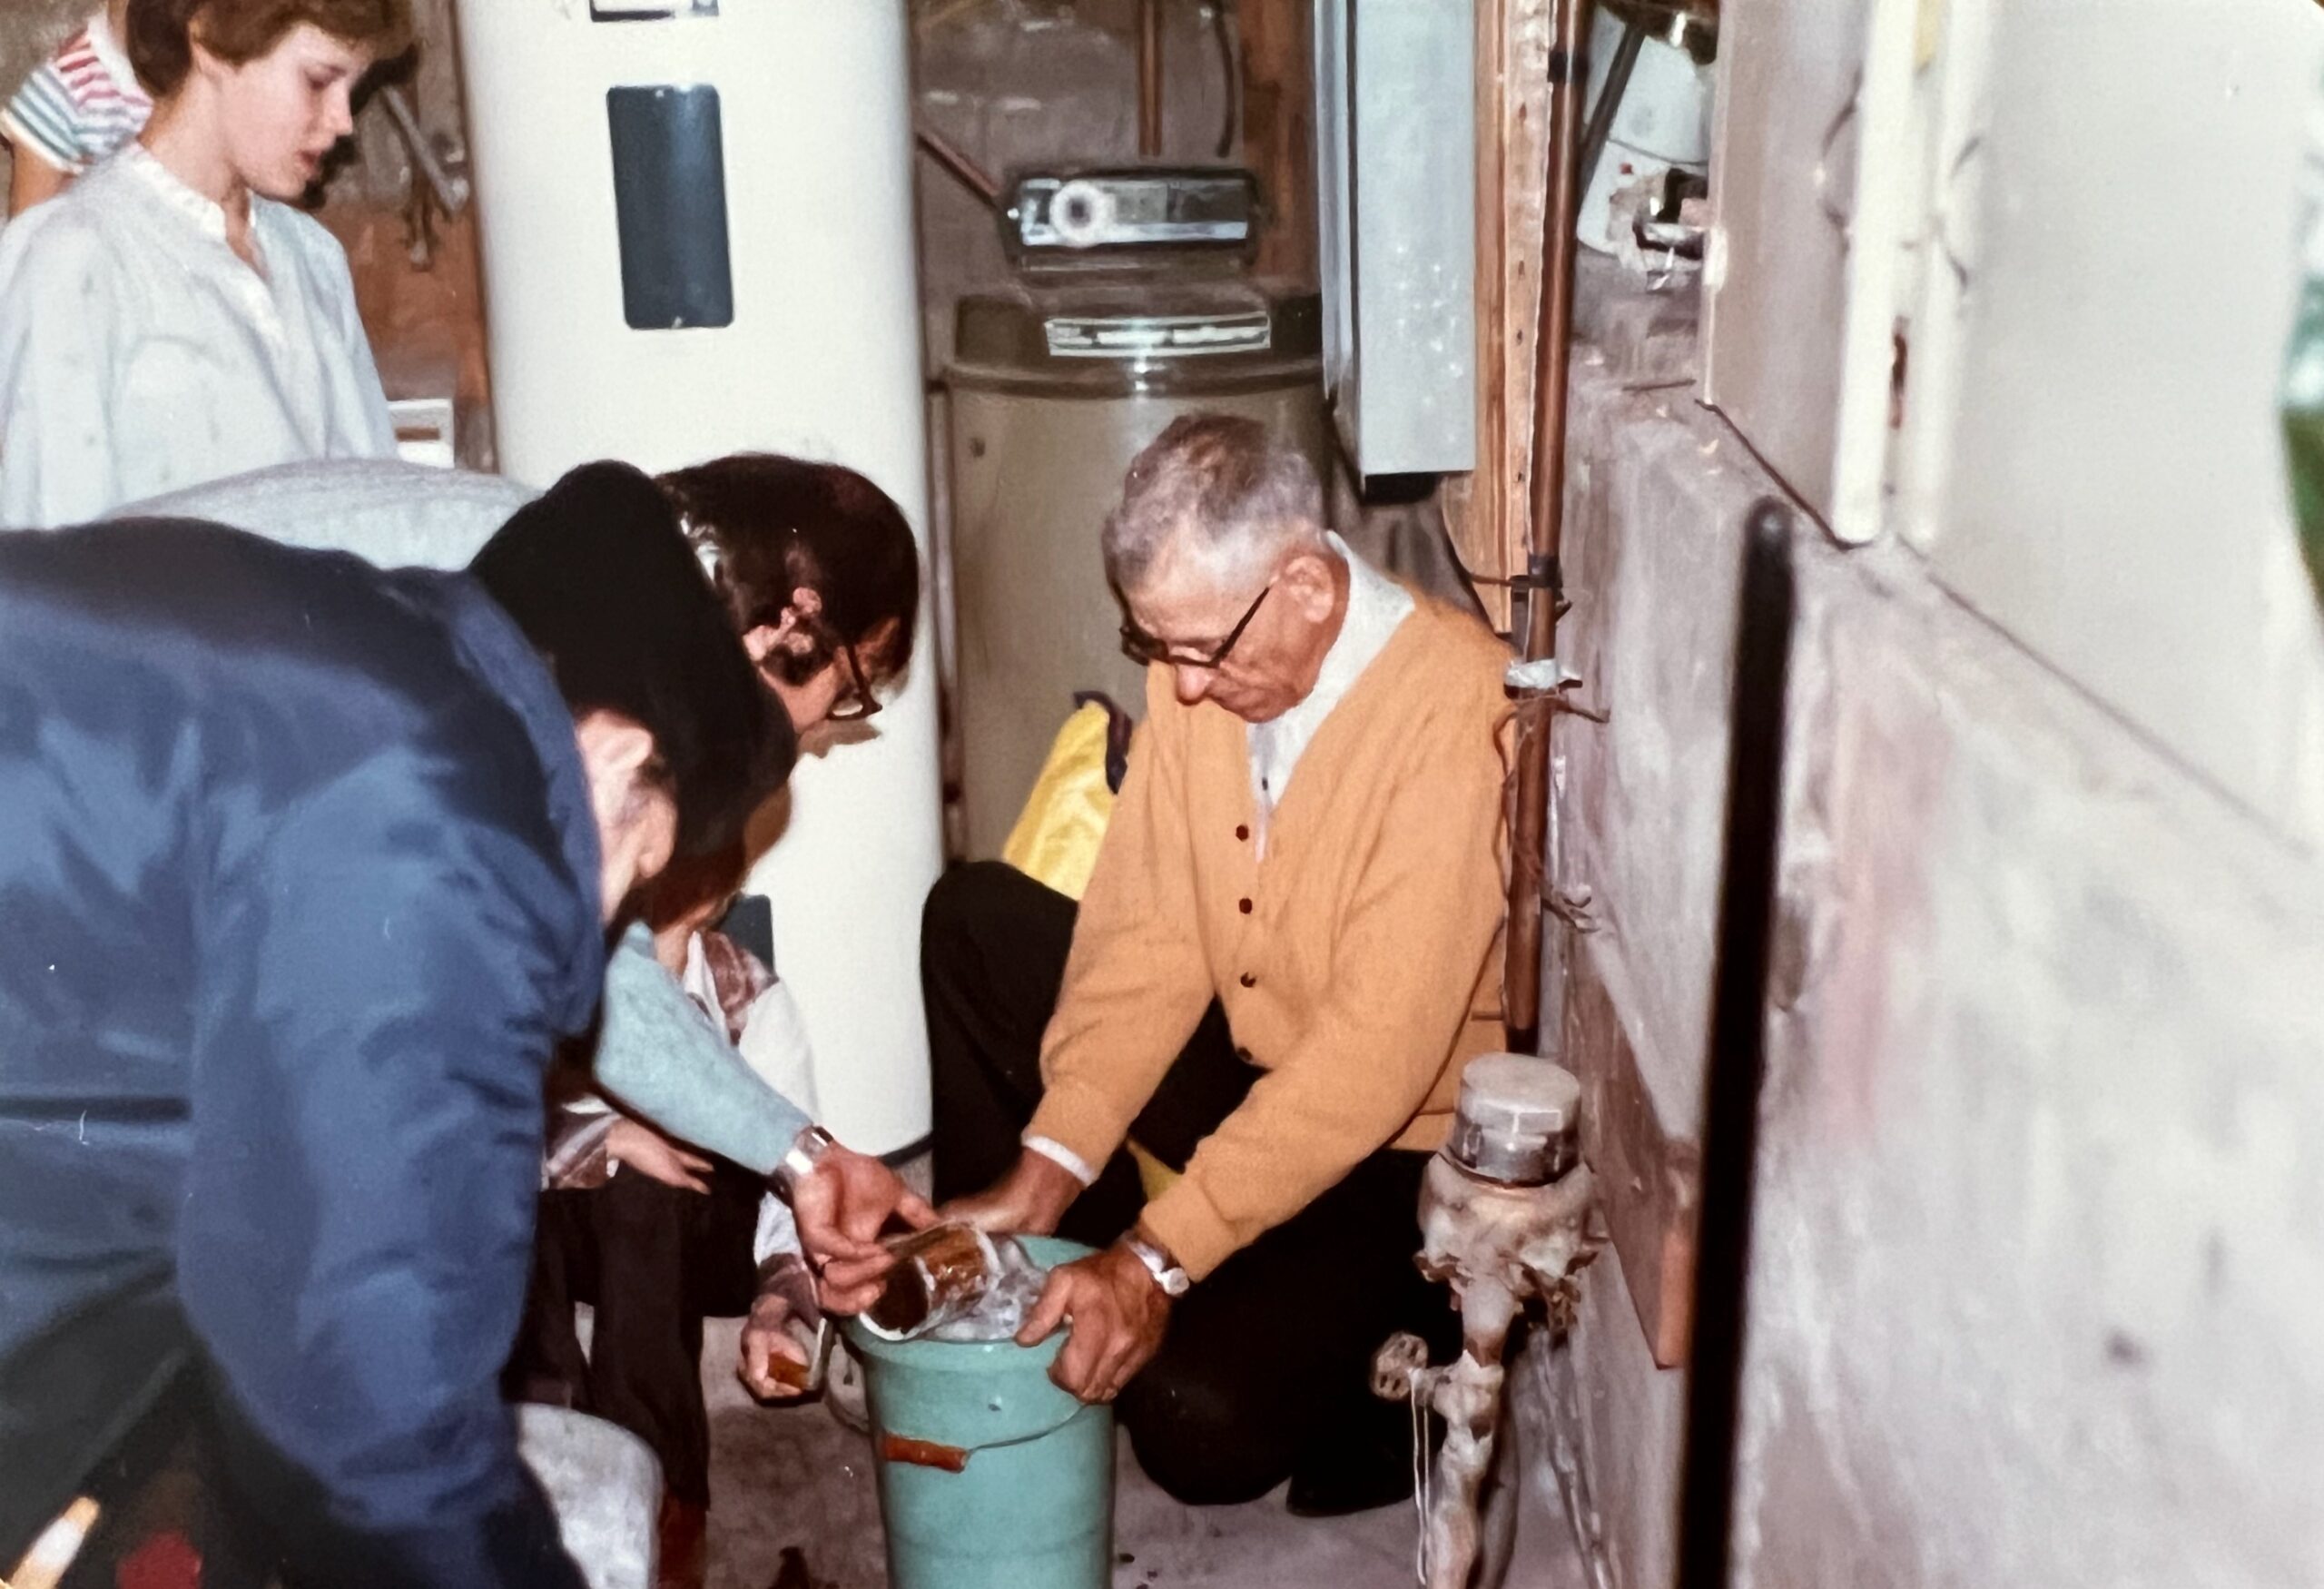 making ice cream in the basement in the 1980s